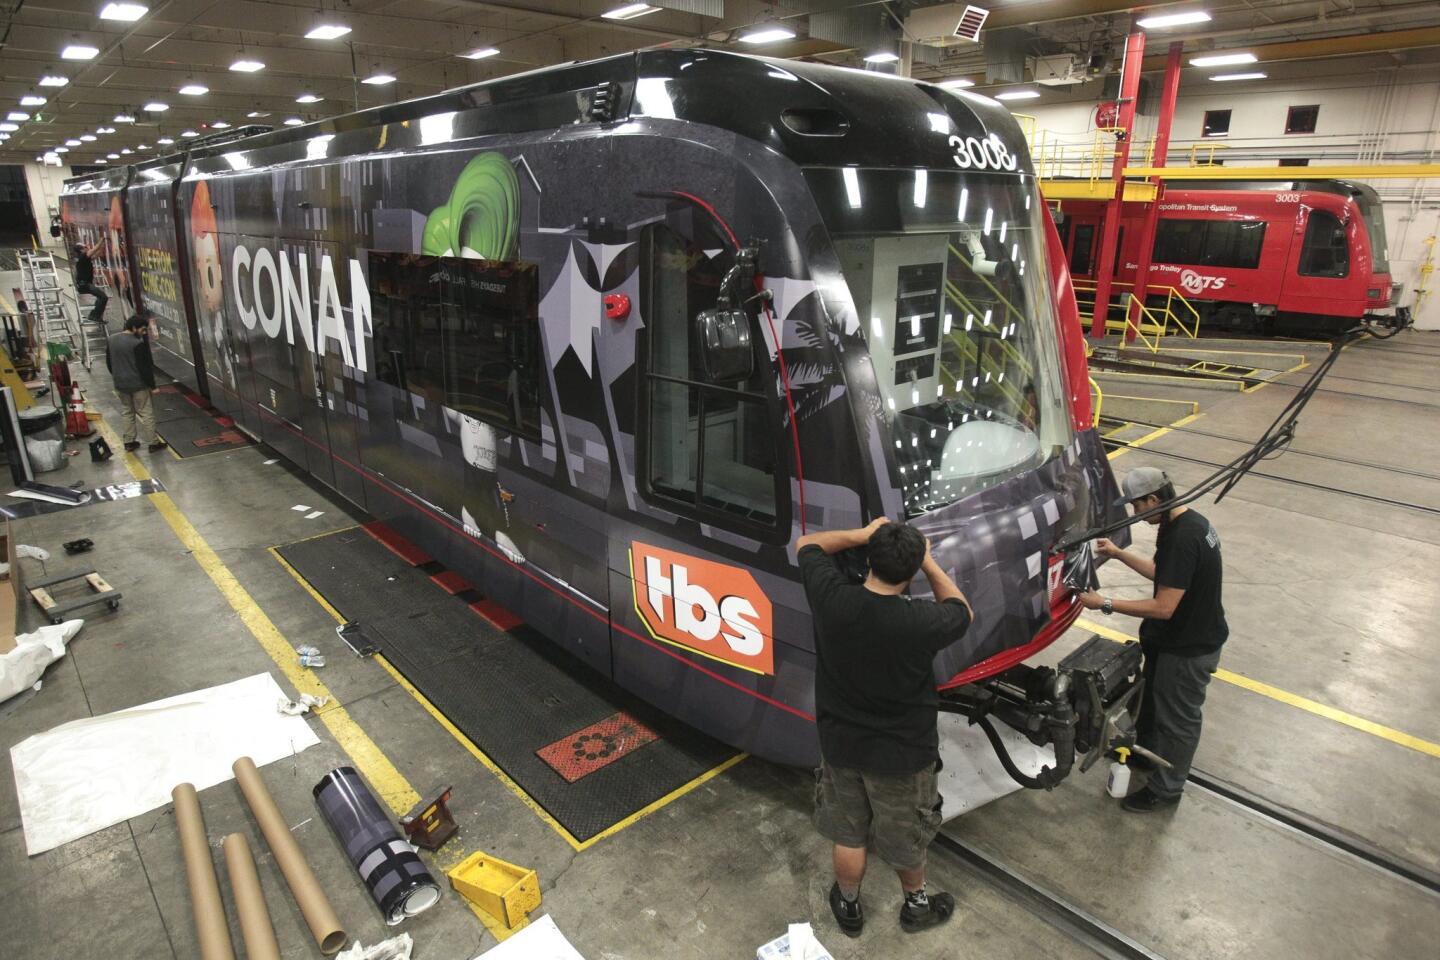 David Garcia, left, and Anthony Soltero wrap the front of a trolley car as they and a crew put on an advertising wrap for TBS television host Conan O'Brien's talk show on the trolley car.